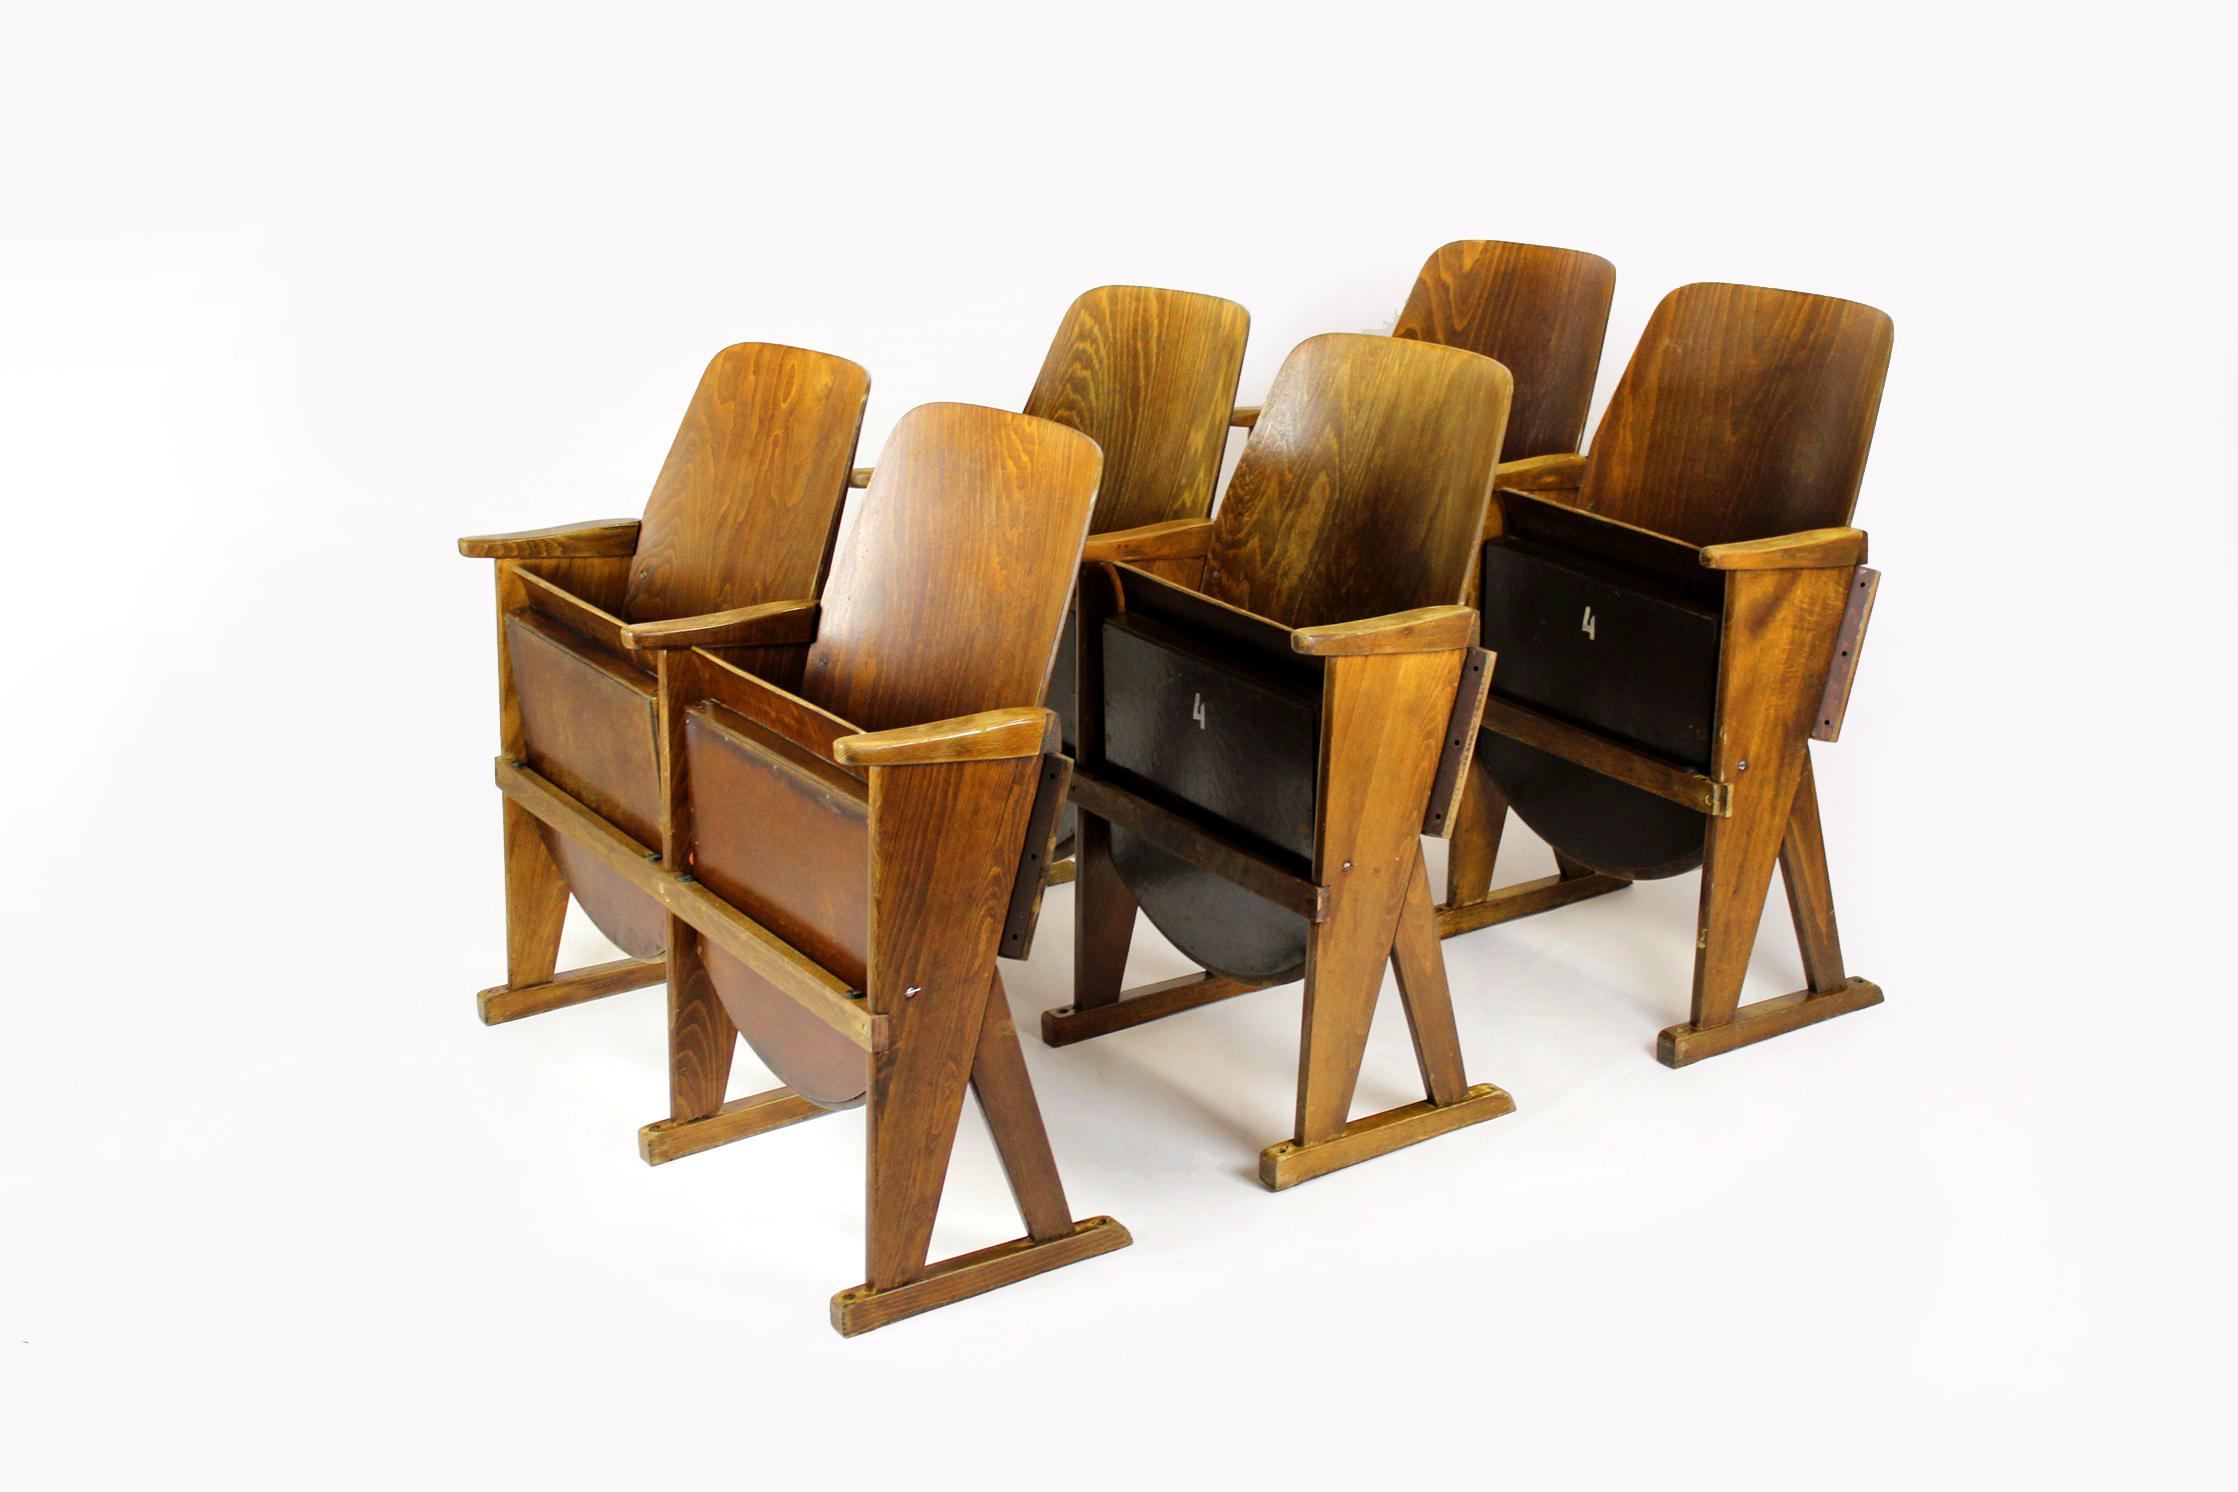 
Original cinema seats manufactured by TON (formerly Thonet) in the 1960s, set of three two-seaters (6 chairs). Made of beech wood and bent plywood. Preserved in original, good condition with visible patina.

More quantity available, please